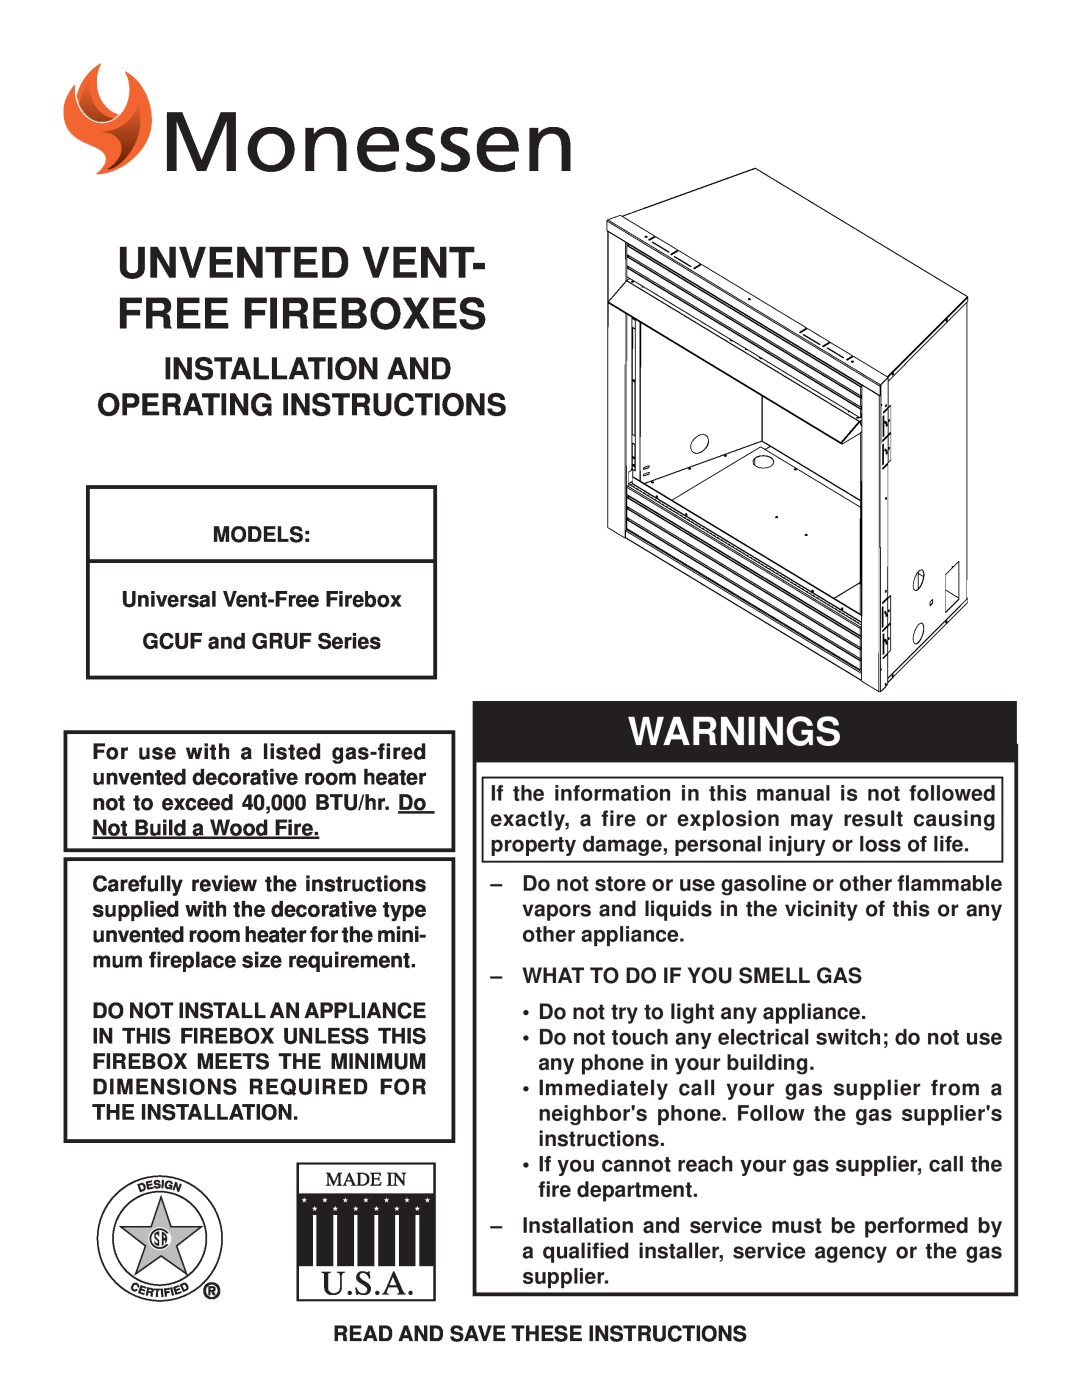 Monessen Hearth dimensions MODELS Universal Vent-FreeFirebox, GCUF and GRUF Series, What To Do If You Smell Gas 